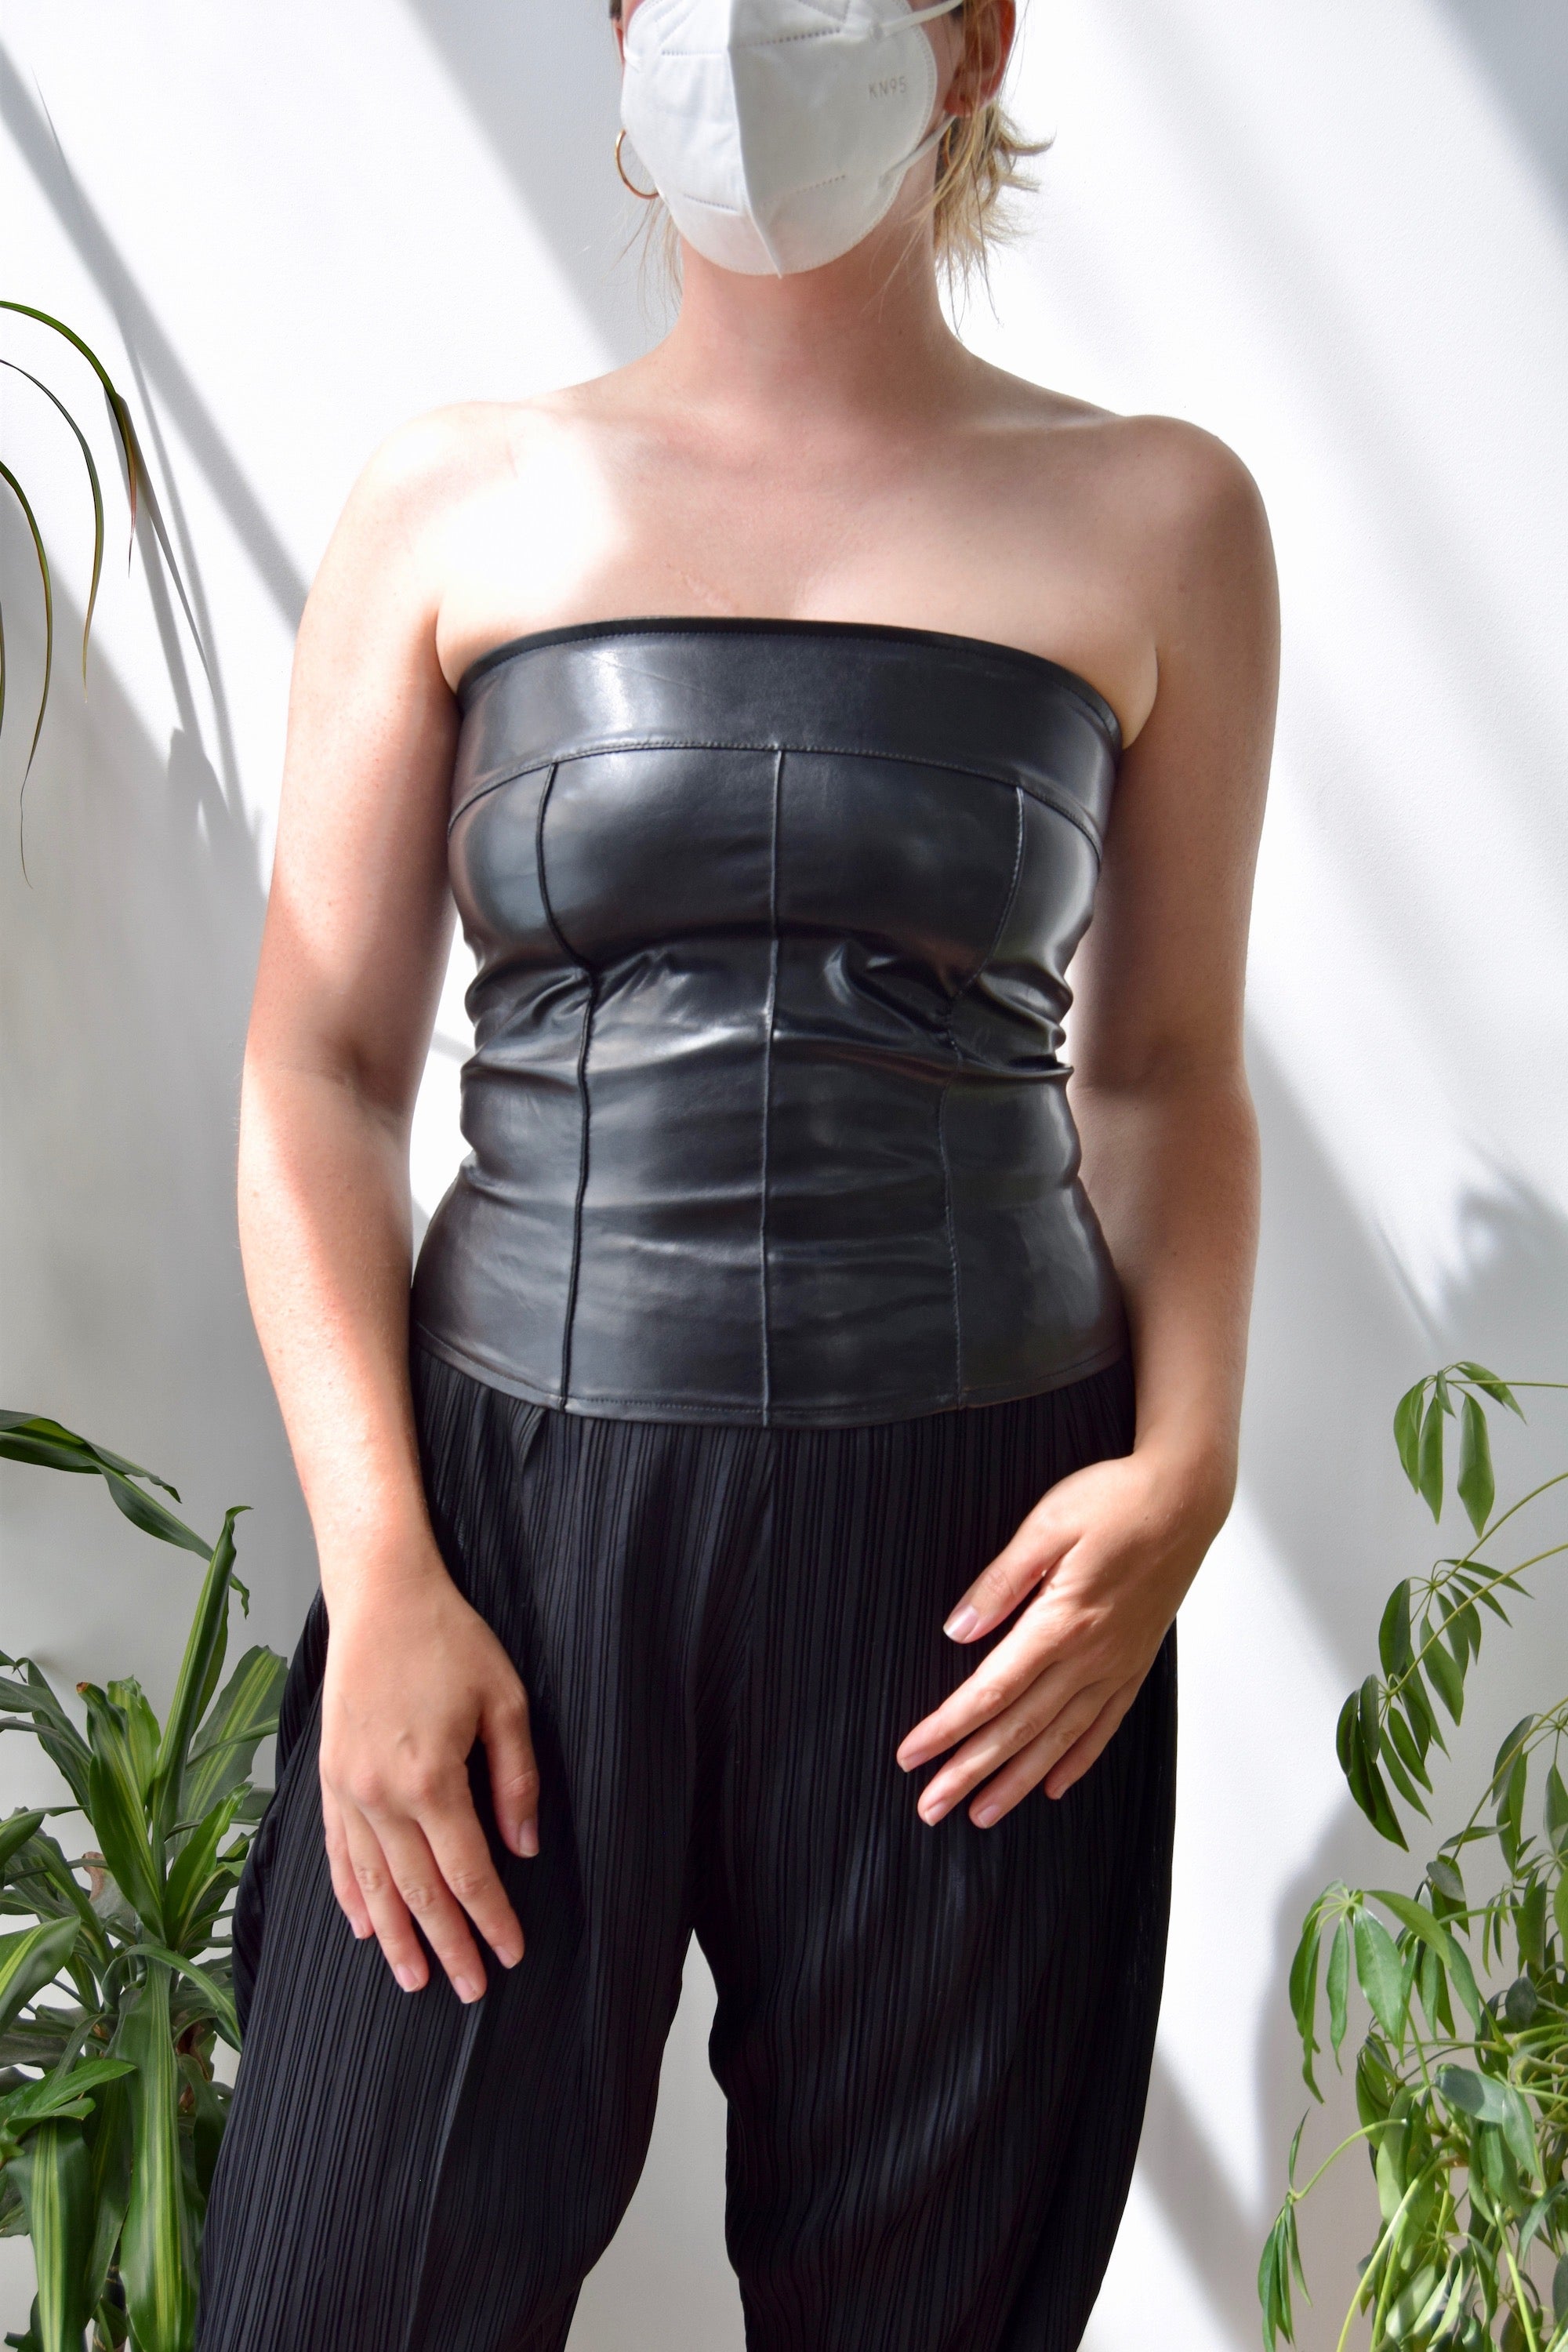 00's Pleather Bustier